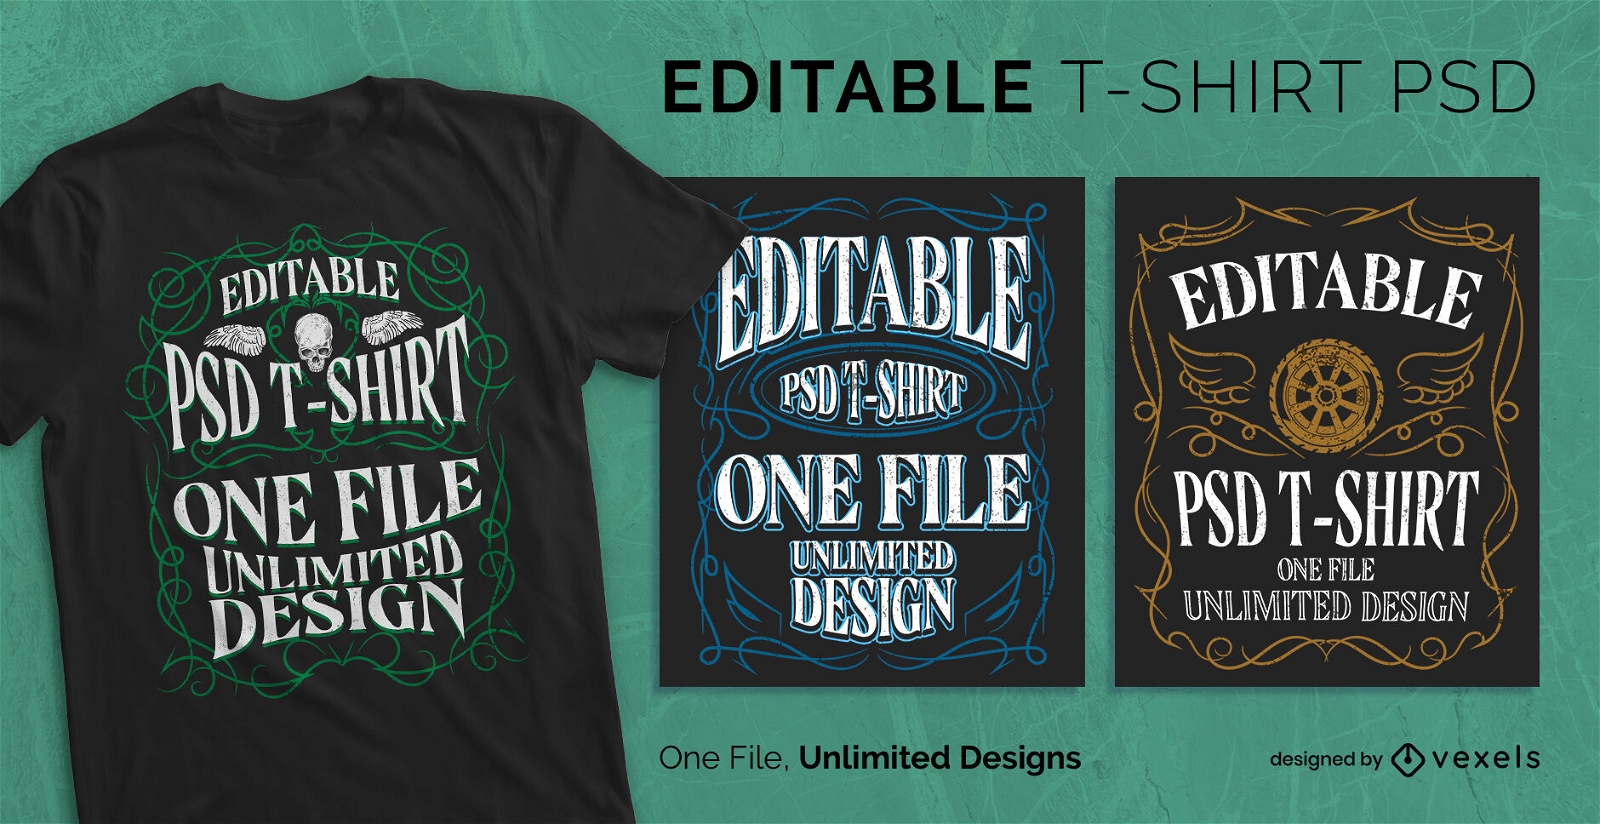 Whiskey tag effect scalable t-shirt psd